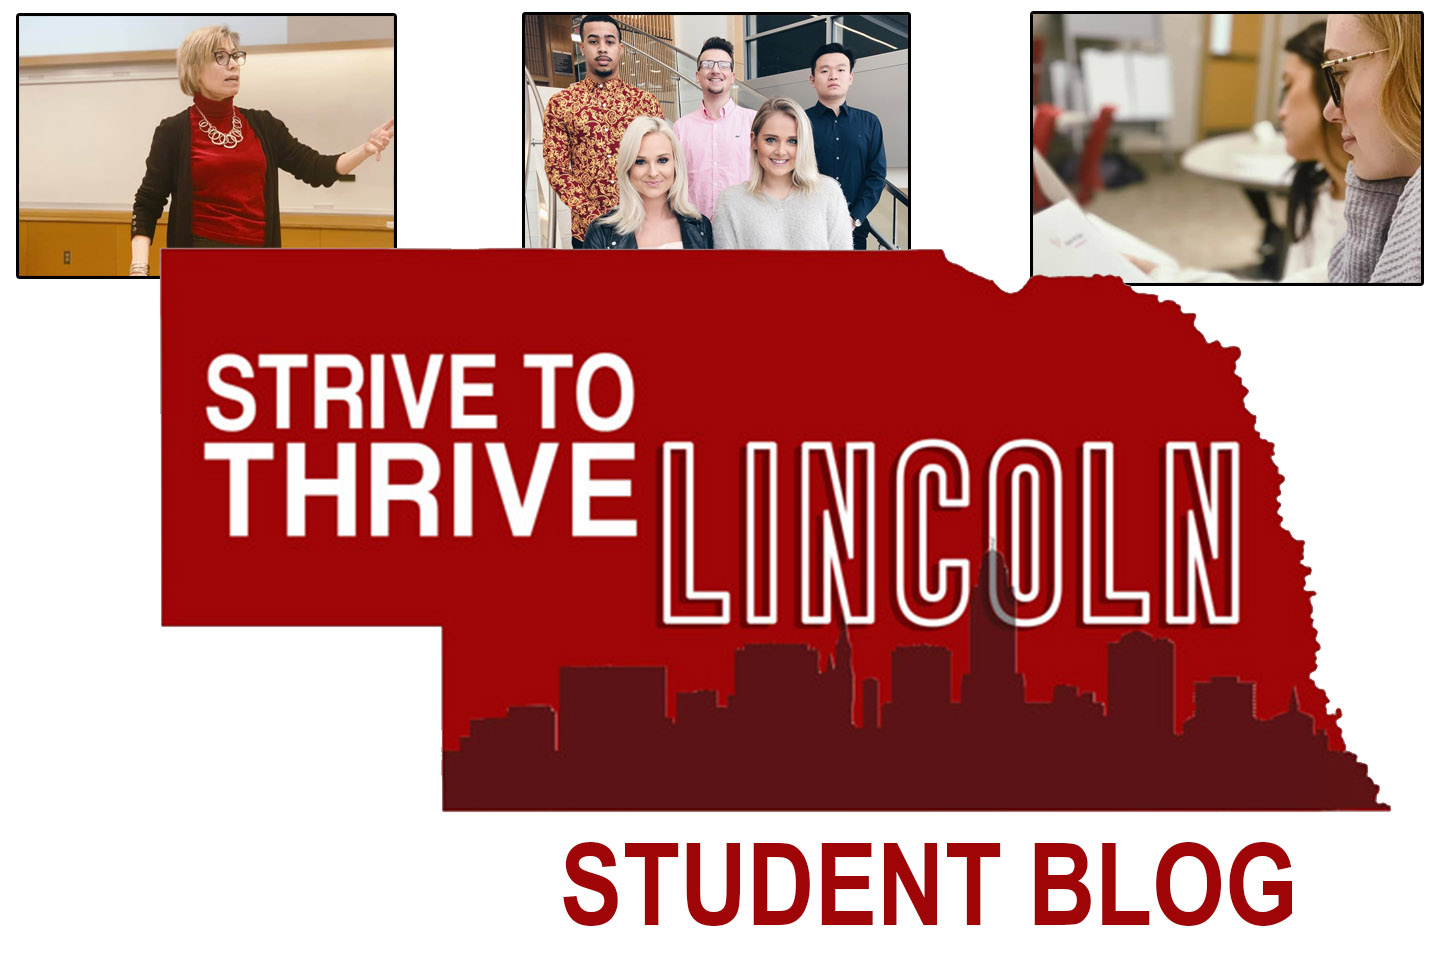 Strive to Thrive Student Blog - Spring 2020